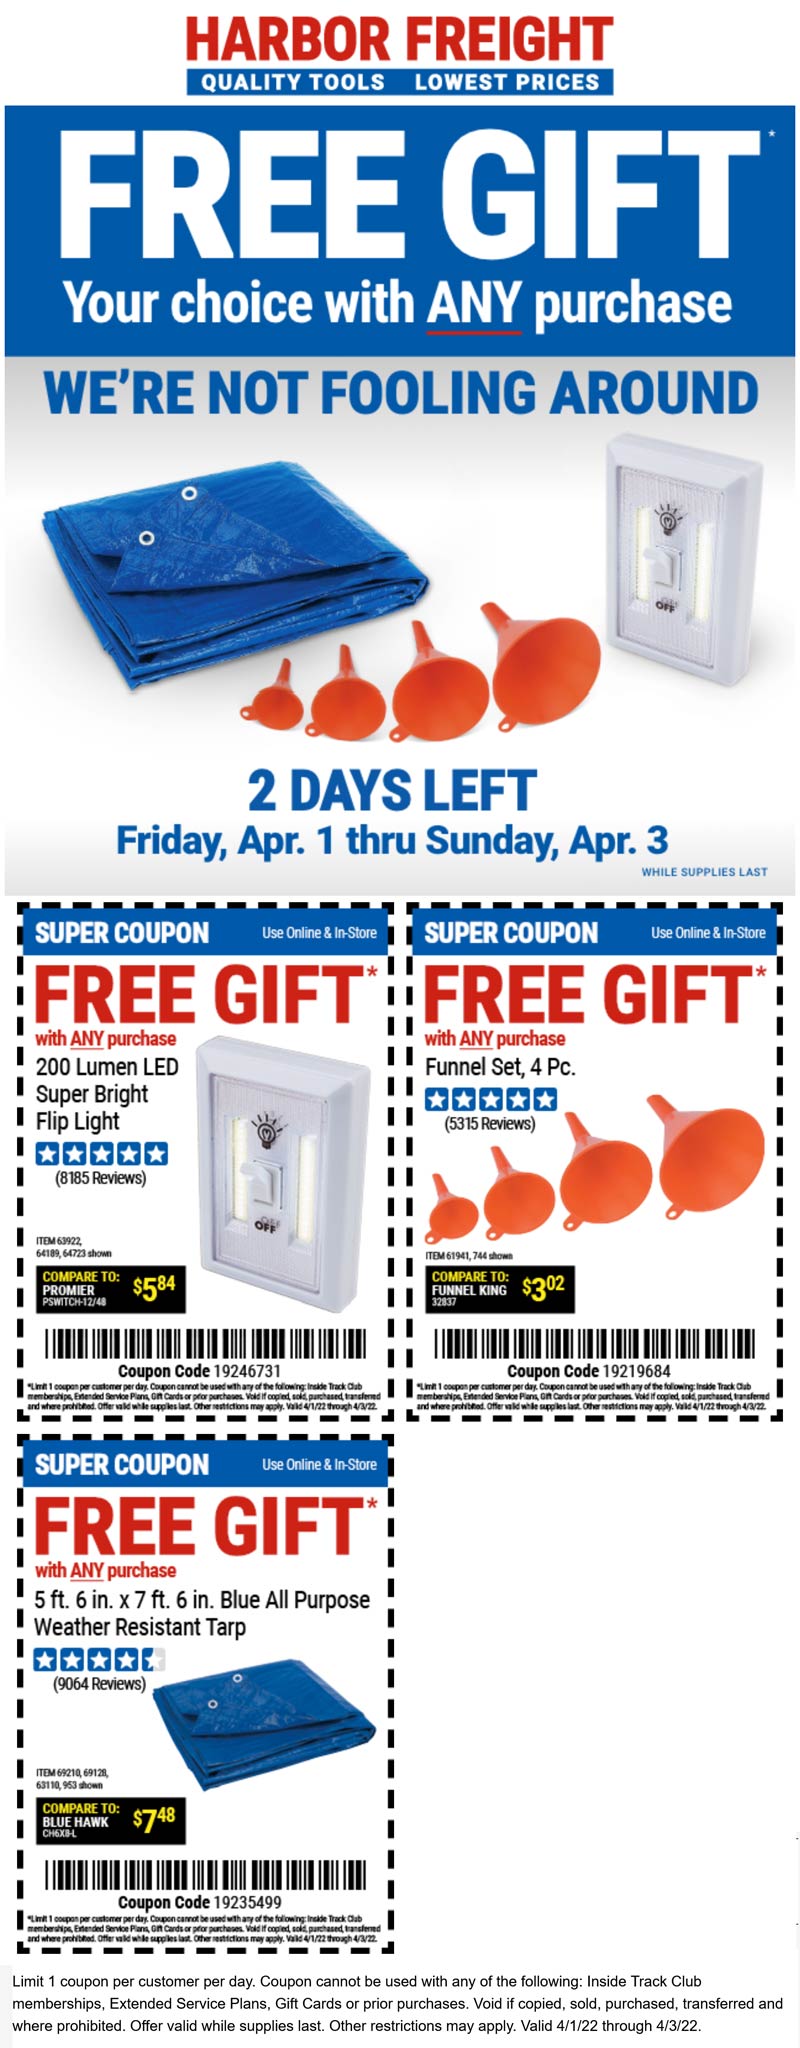 Harbor Freight Tools stores Coupon  Free gifts with any purchase at Harbor Freight Tools #harborfreighttools 